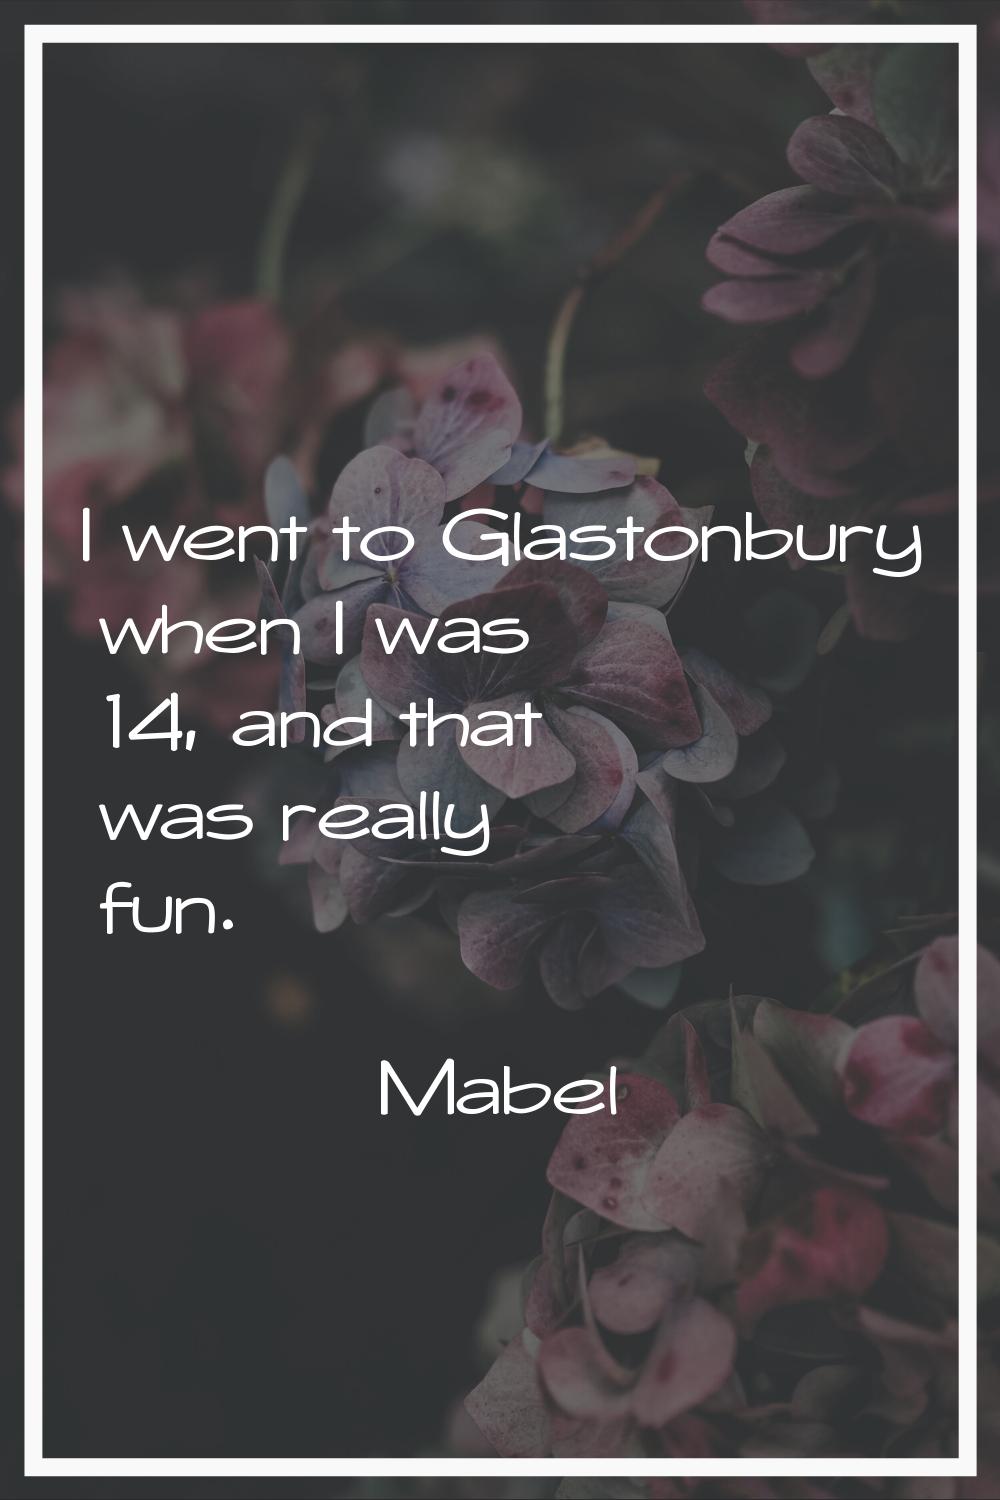 I went to Glastonbury when I was 14, and that was really fun.